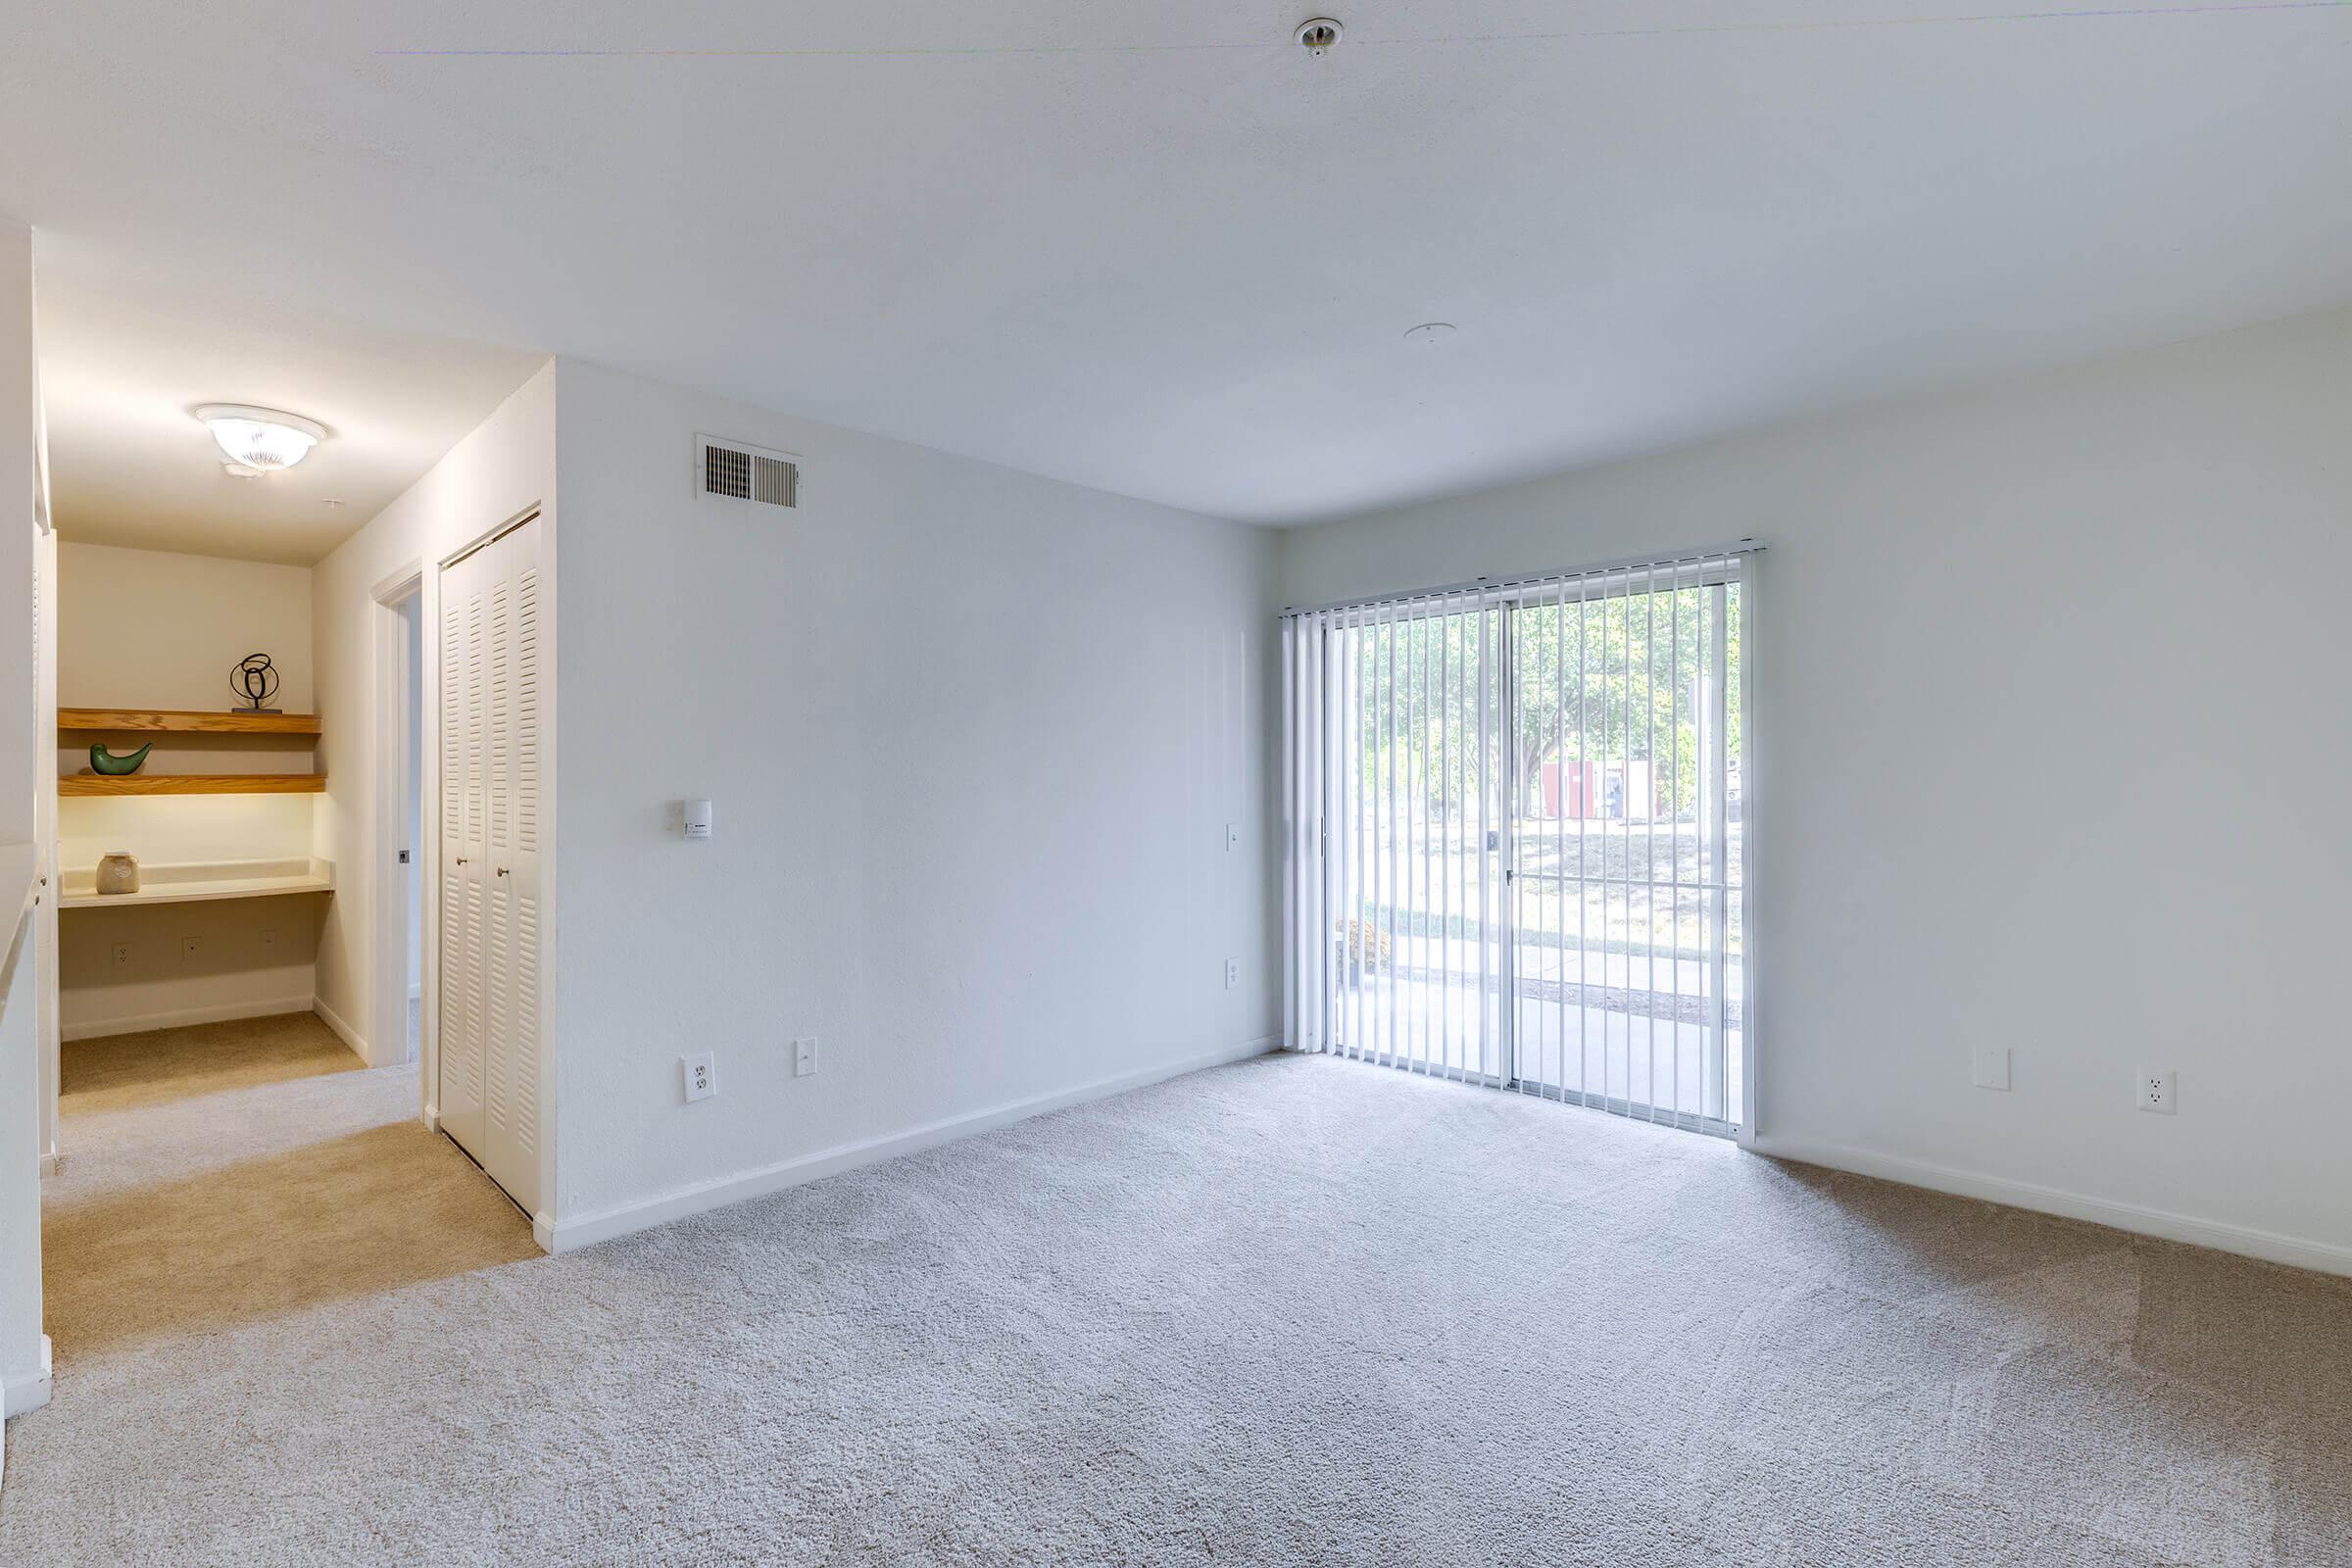 NATURAL LIGHTING IN SPACIOUS APARTMENT FOR RENT AT THE BEND AT 4800 APARTMENTS